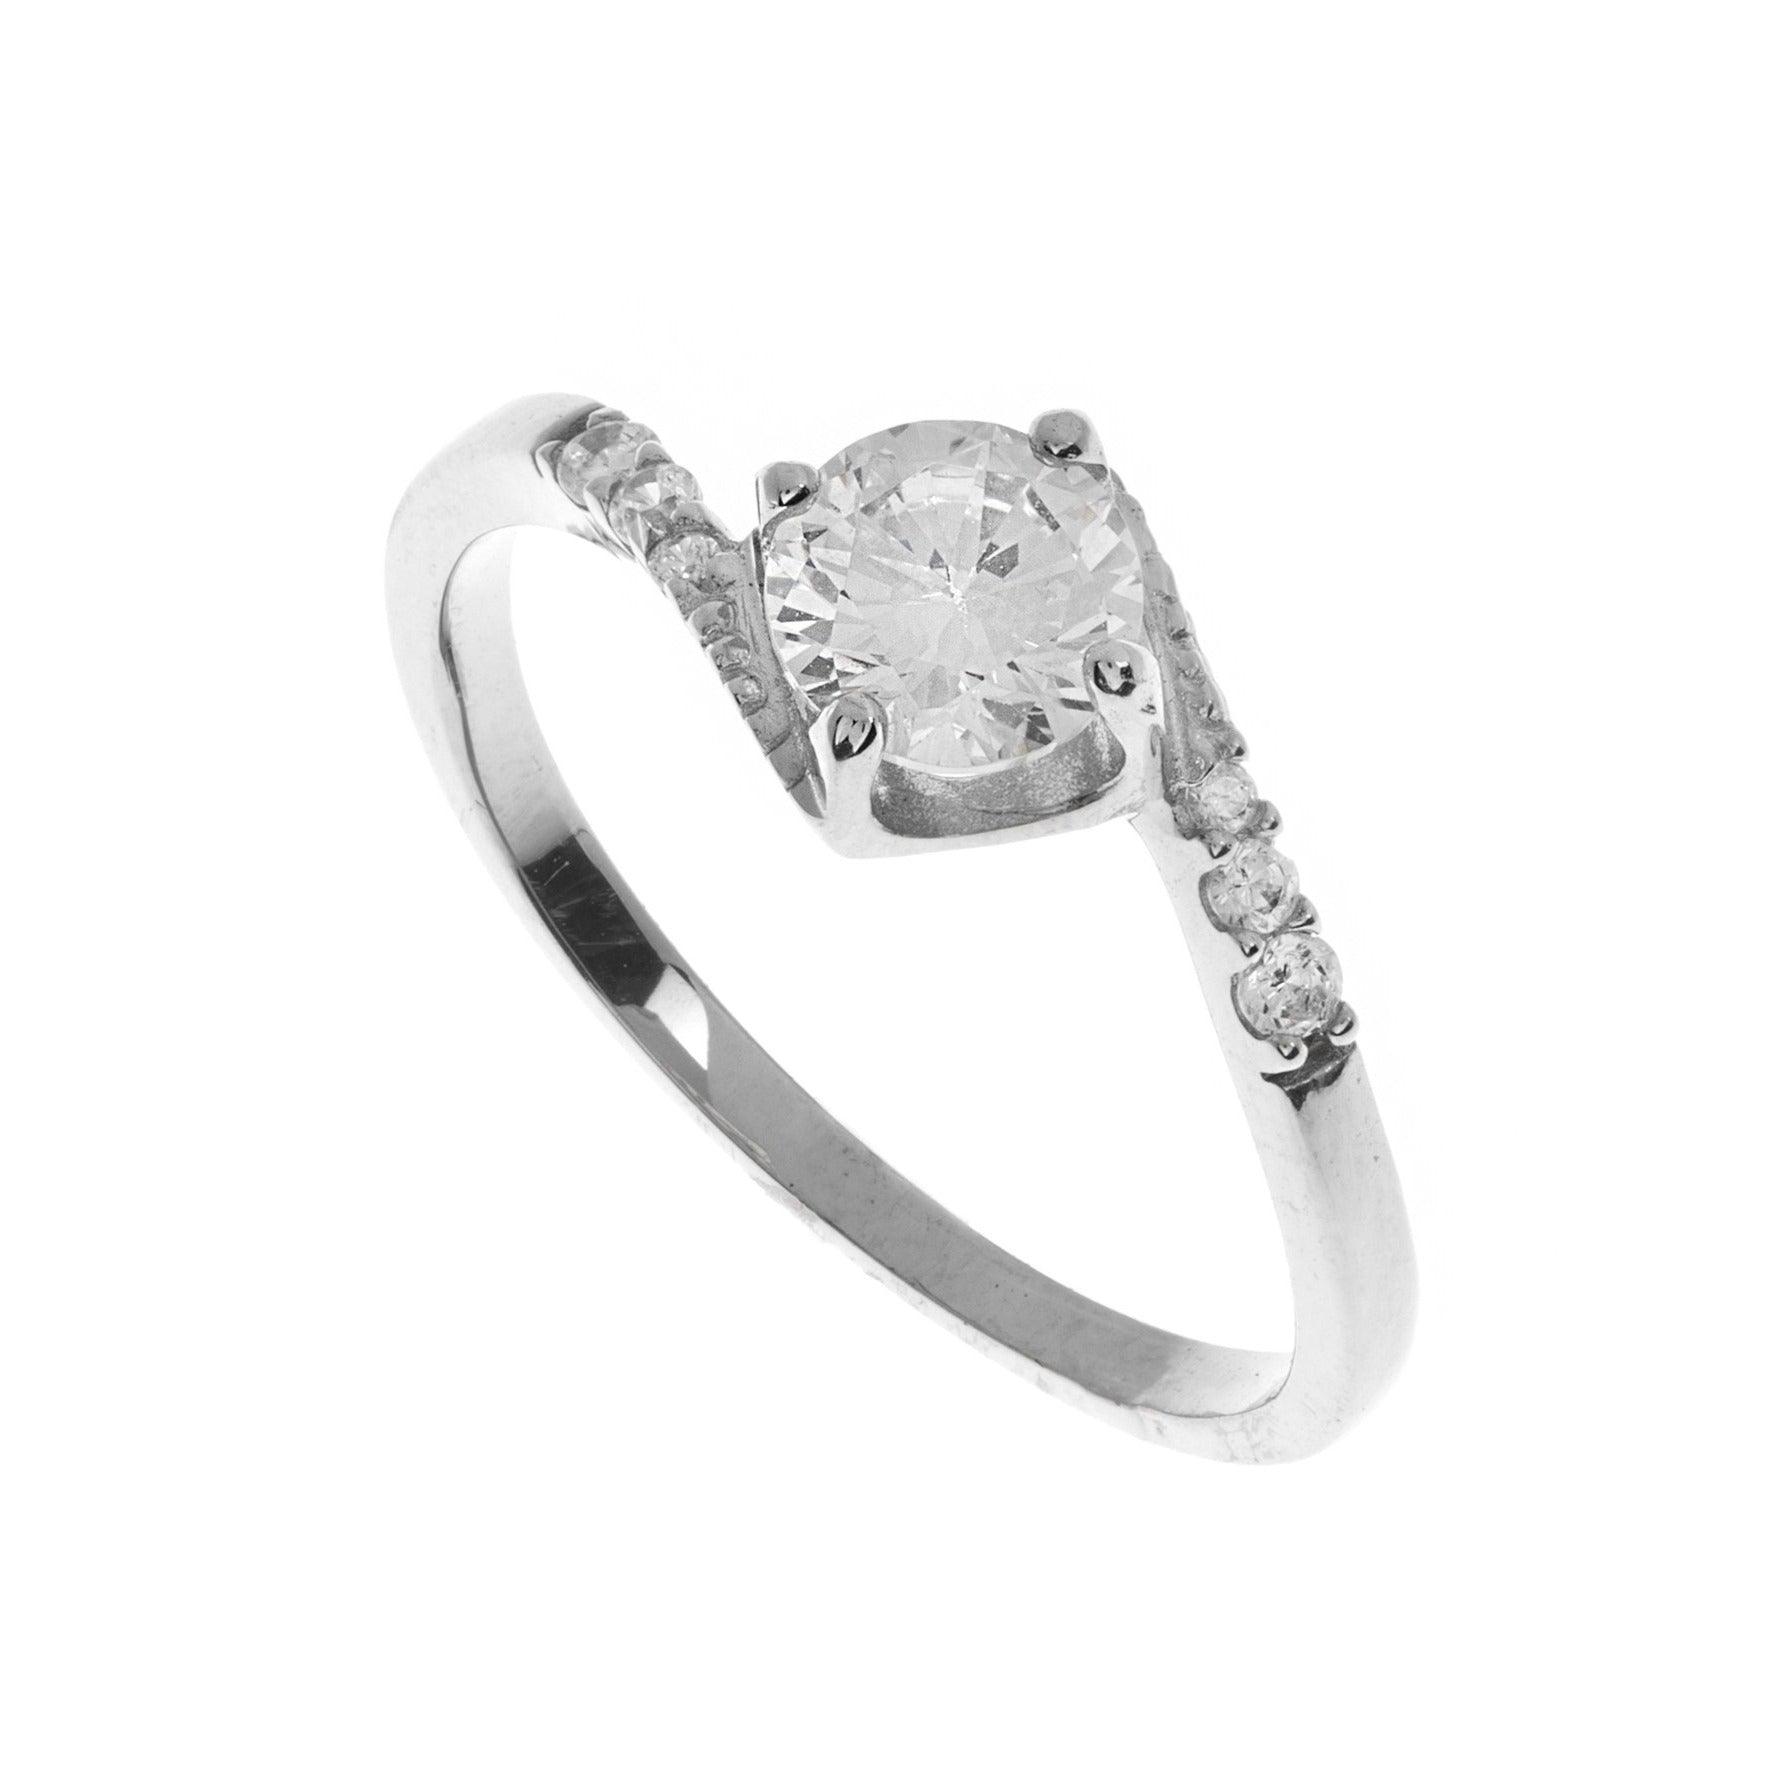 18ct White / Yellow Gold Cubic Zirconia Engagement Ring (LR-3833) - Minar Jewellers